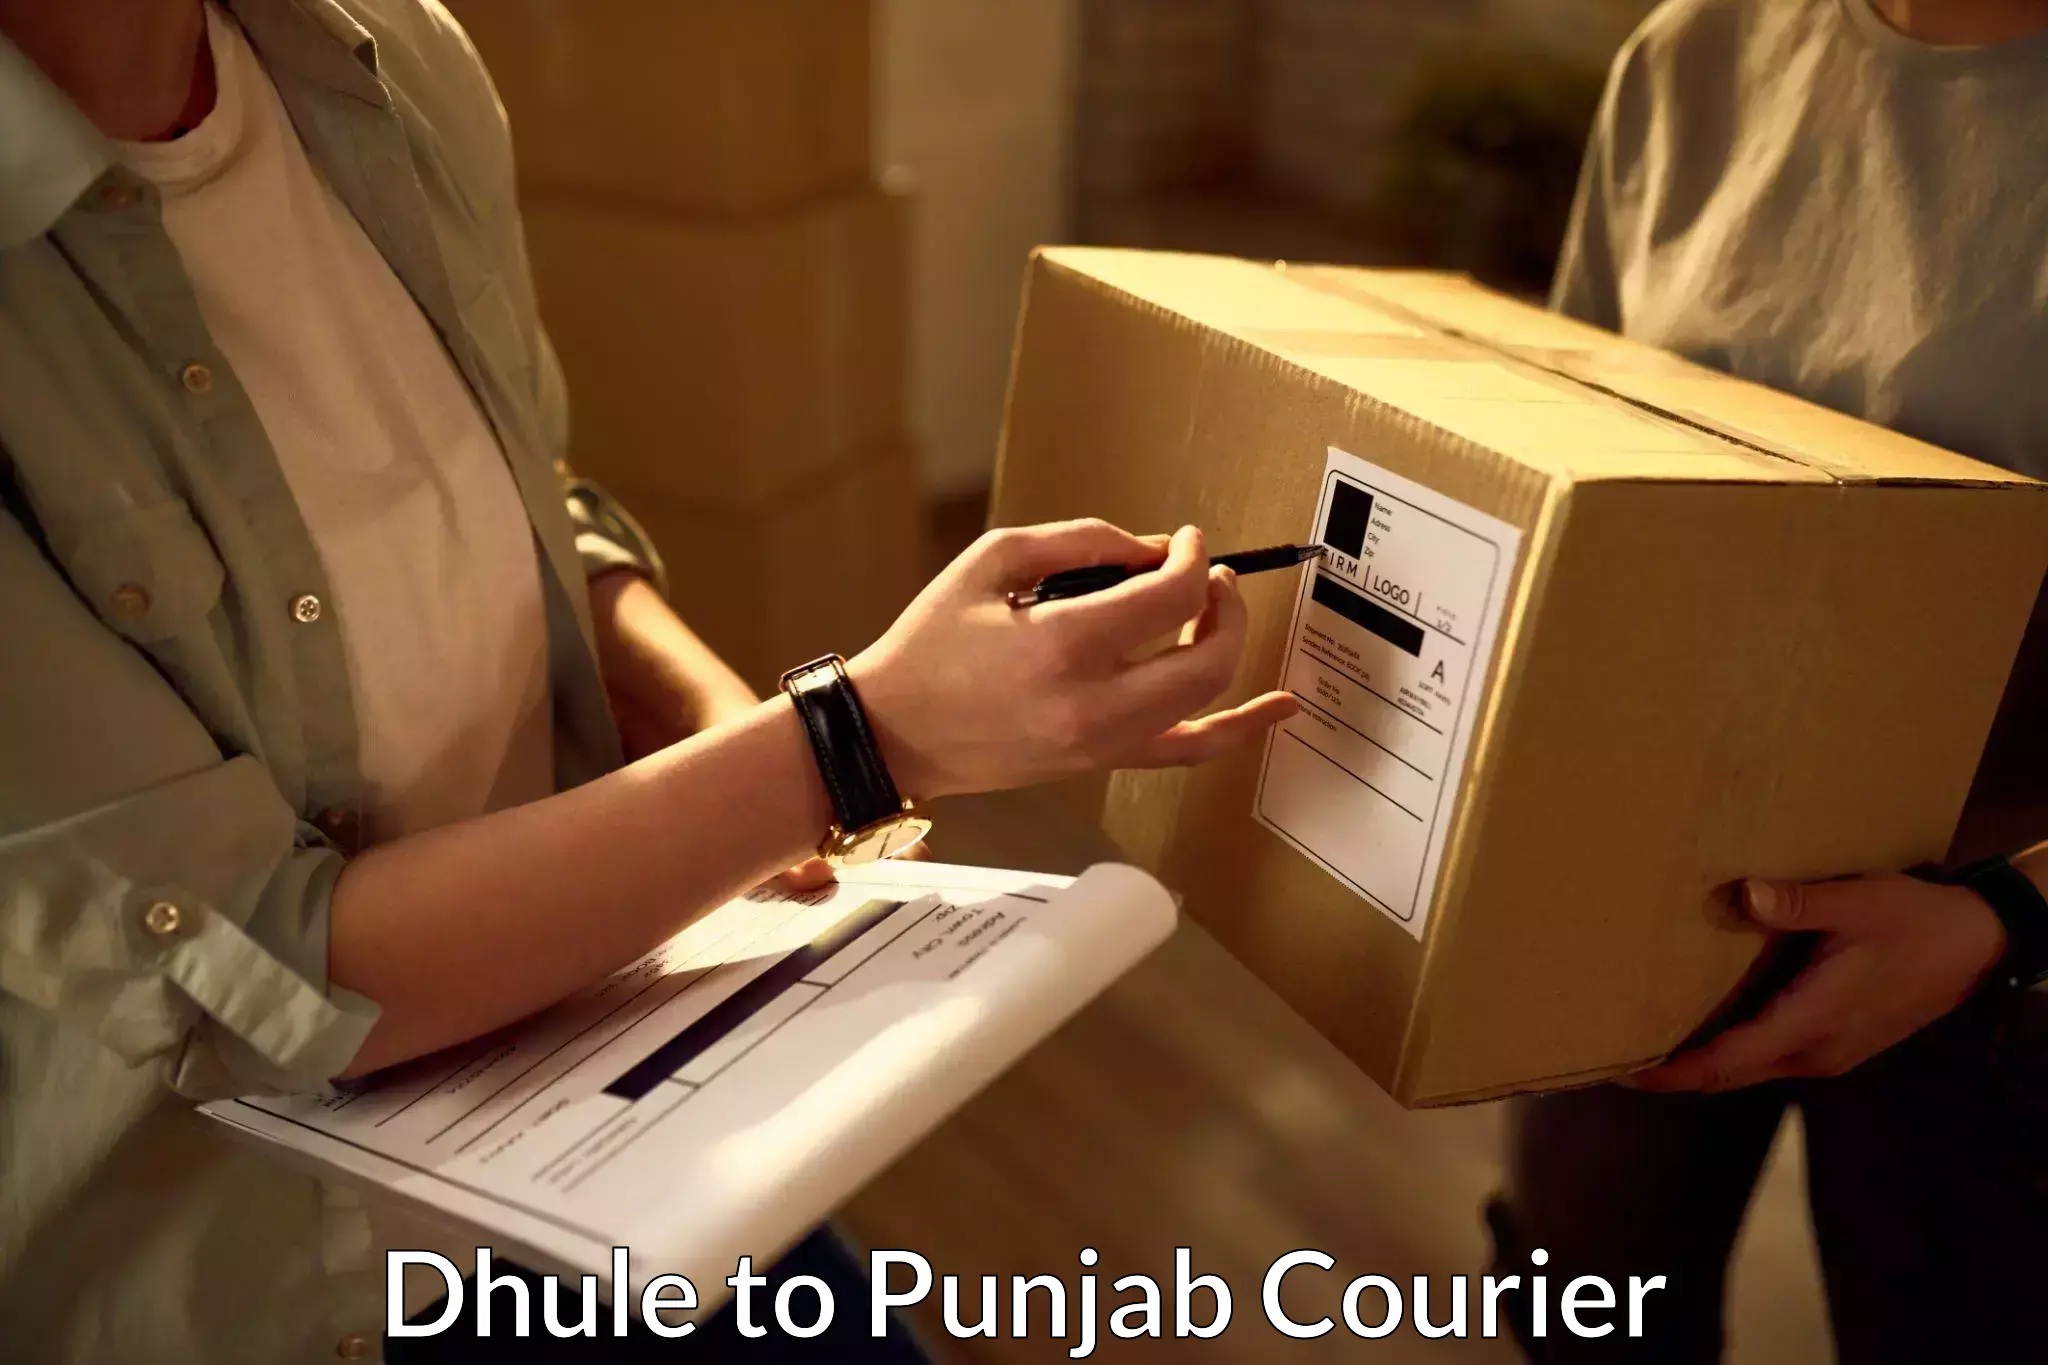 Specialized shipment handling Dhule to Punjab